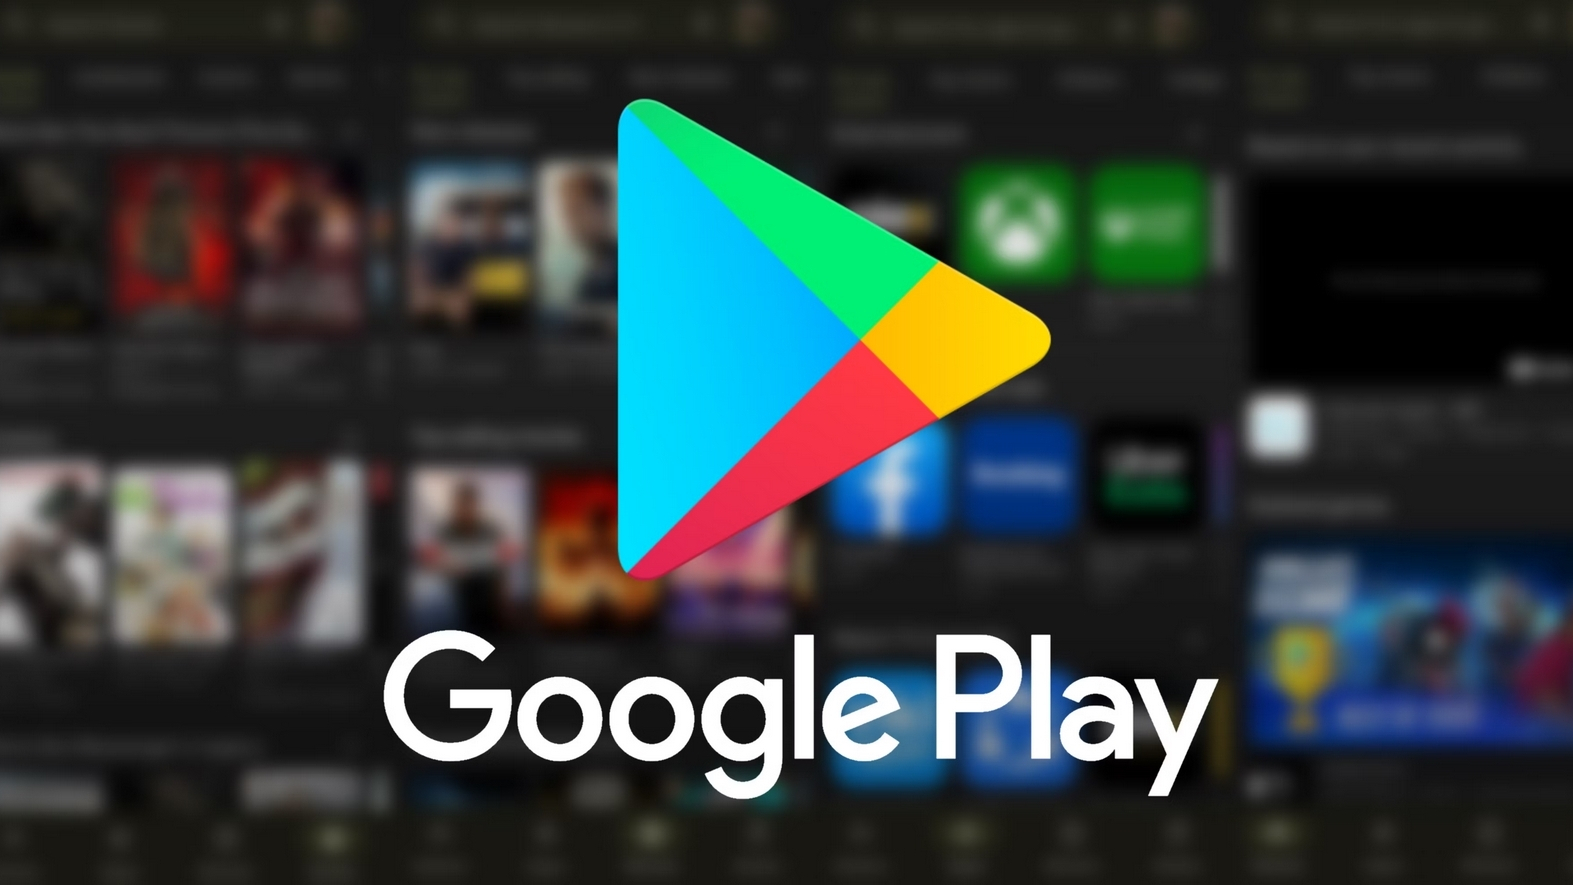 [$ 64.33] Google Play €45 IT Gift Card